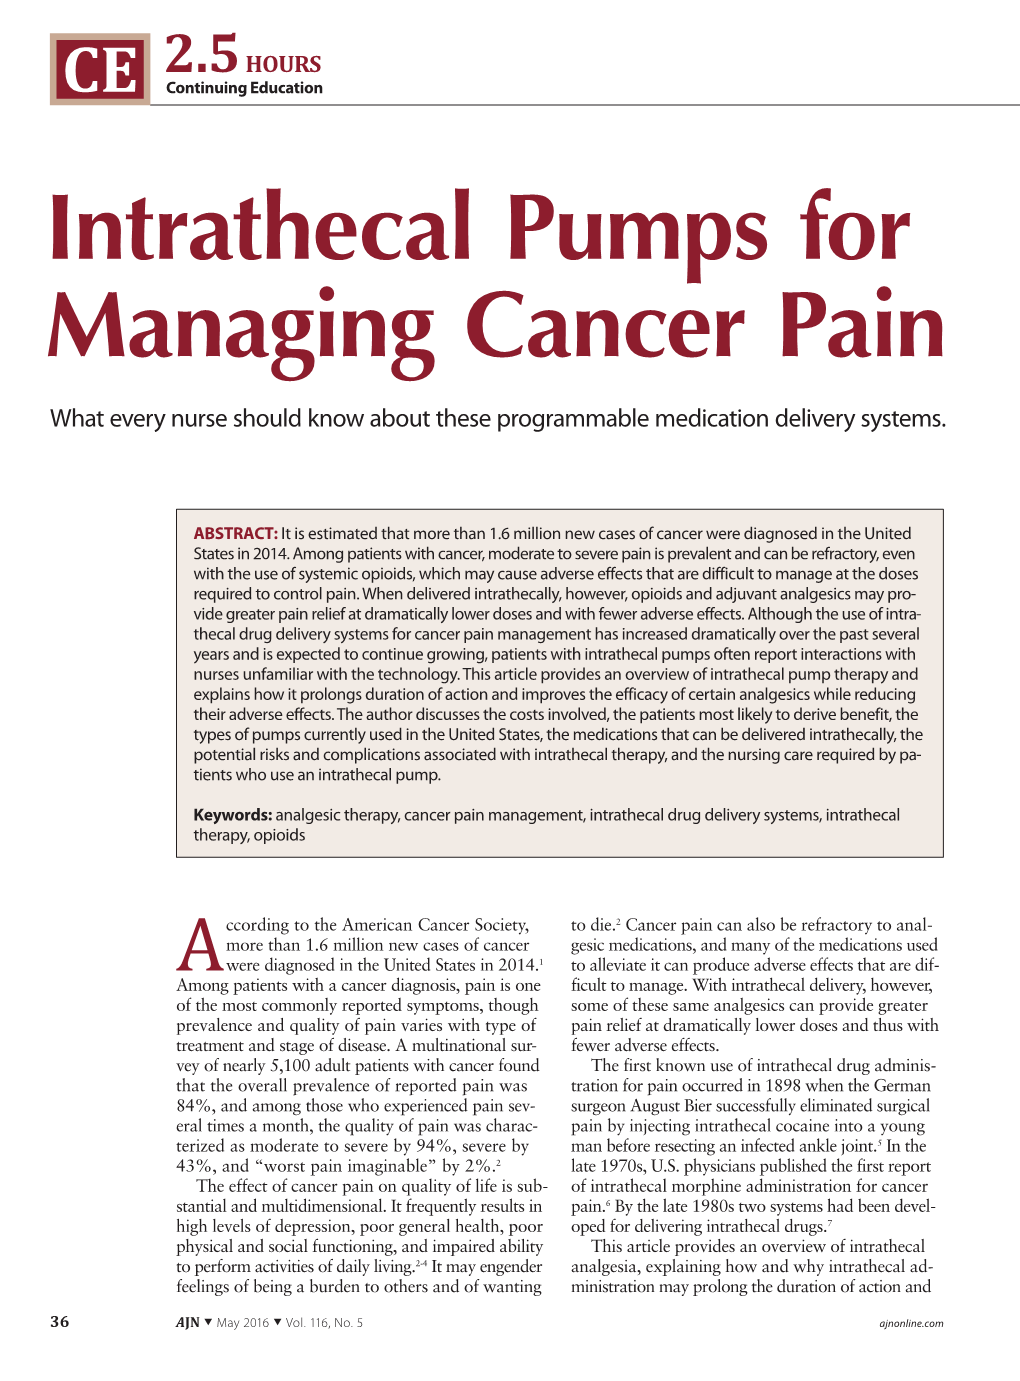 Intrathecal Pumps for Managing Cancer Pain